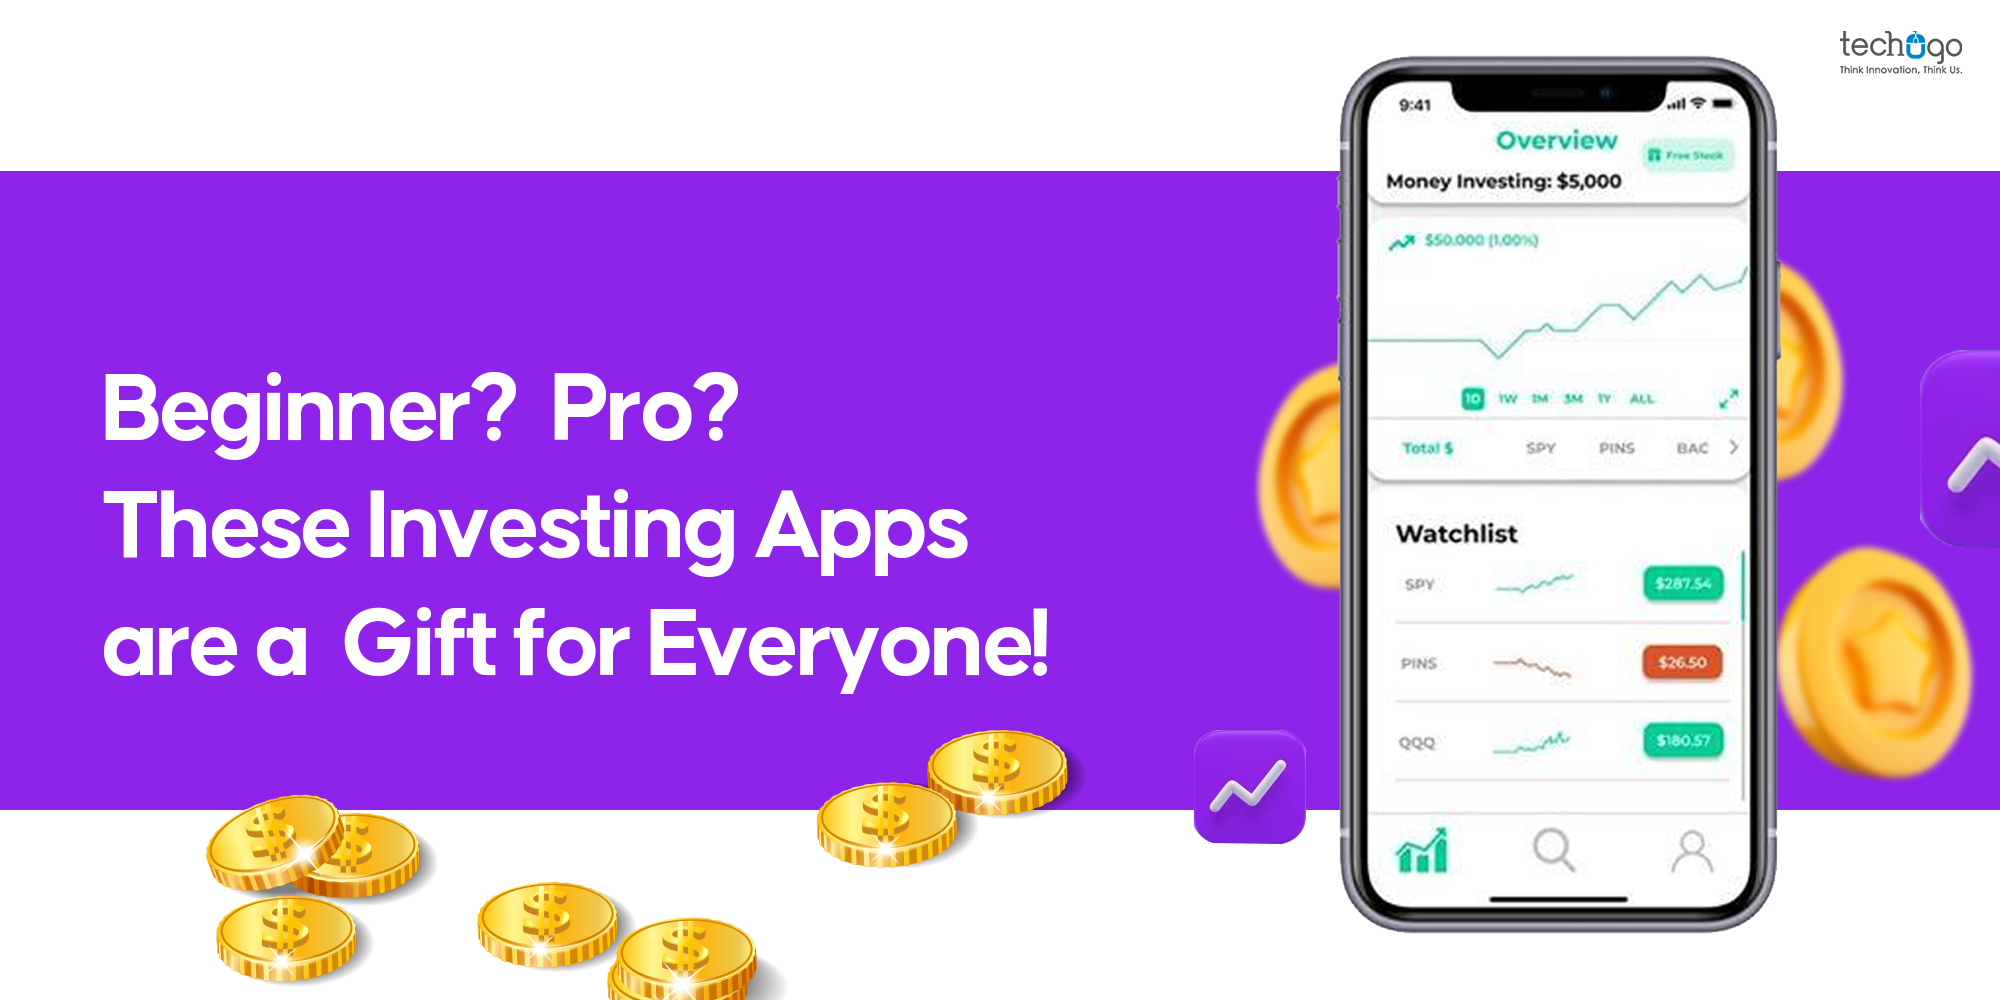 Beginner? Pro? These Investing Apps are a Gift for Everyone!